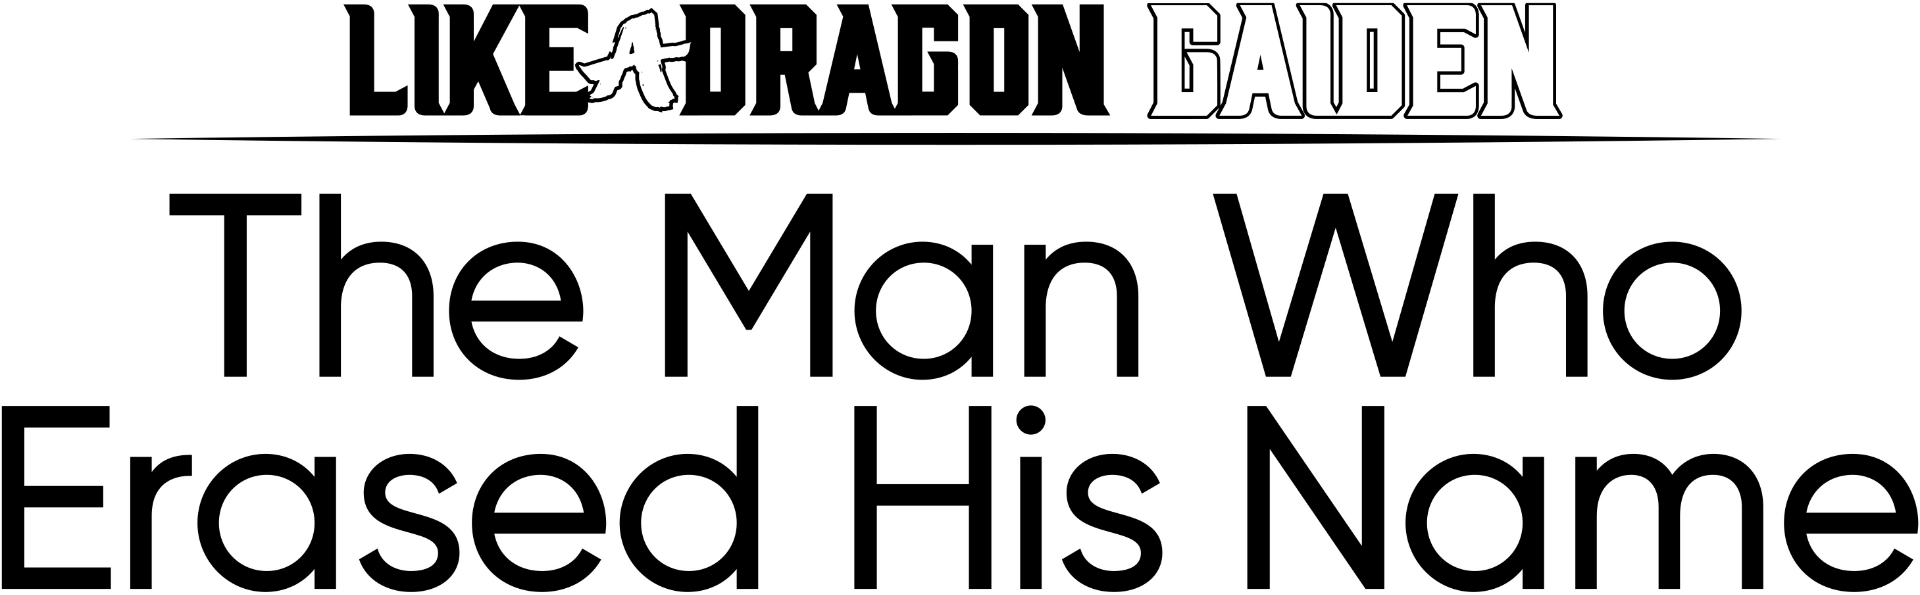 Like a Dragon Gaiden: The Man Who Erased His Name review